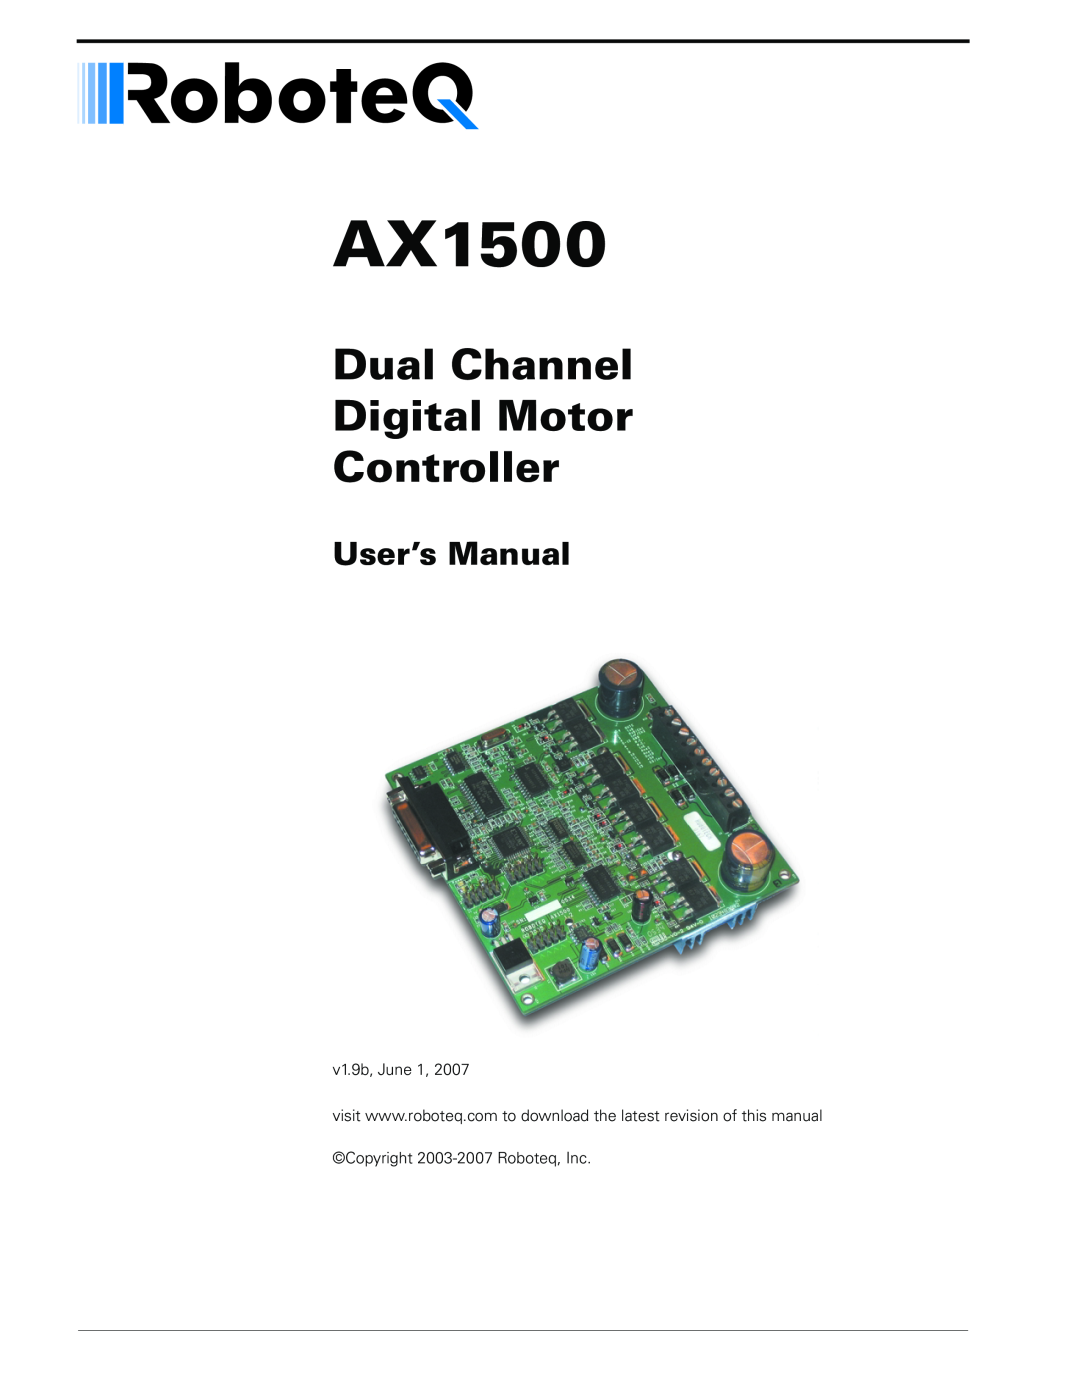 RoboteQ AX1500, AX2550 user manual Dual Channel Digital Motor Controller, User’s Manual 